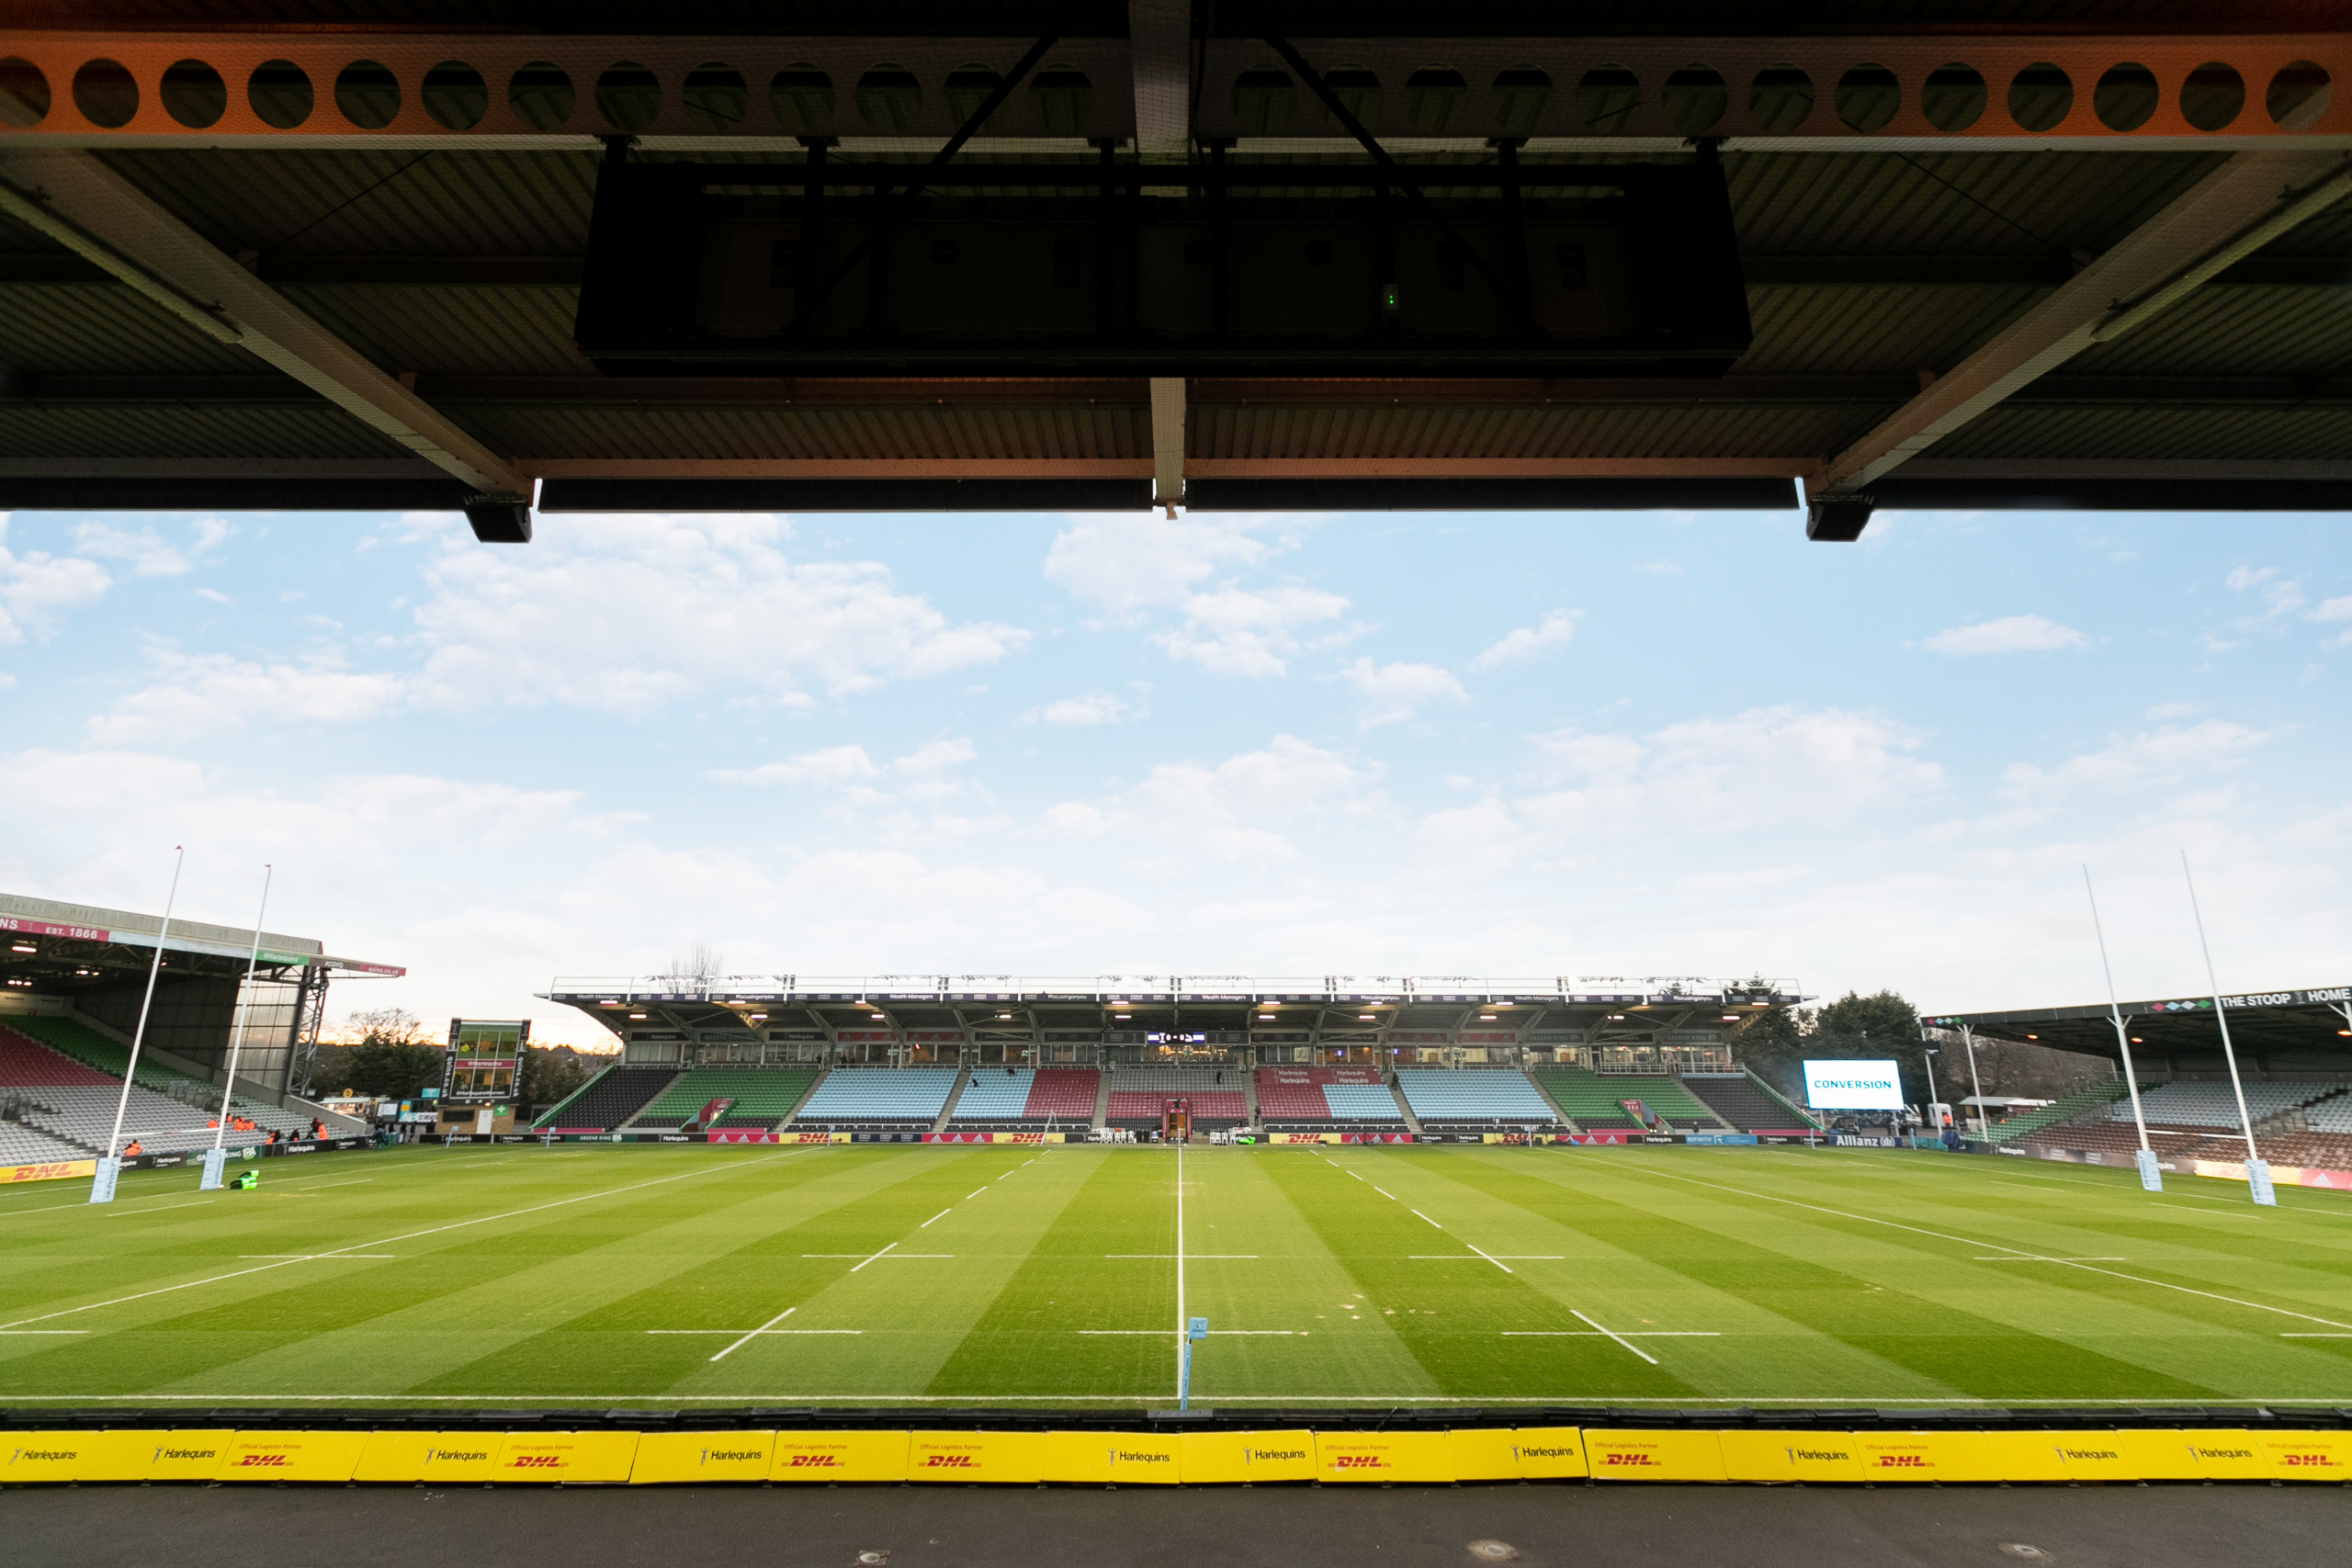 New NEXO P+ system at The Twickenham Stoop keeps the fans safe, while delivering a brilliant matchday experience